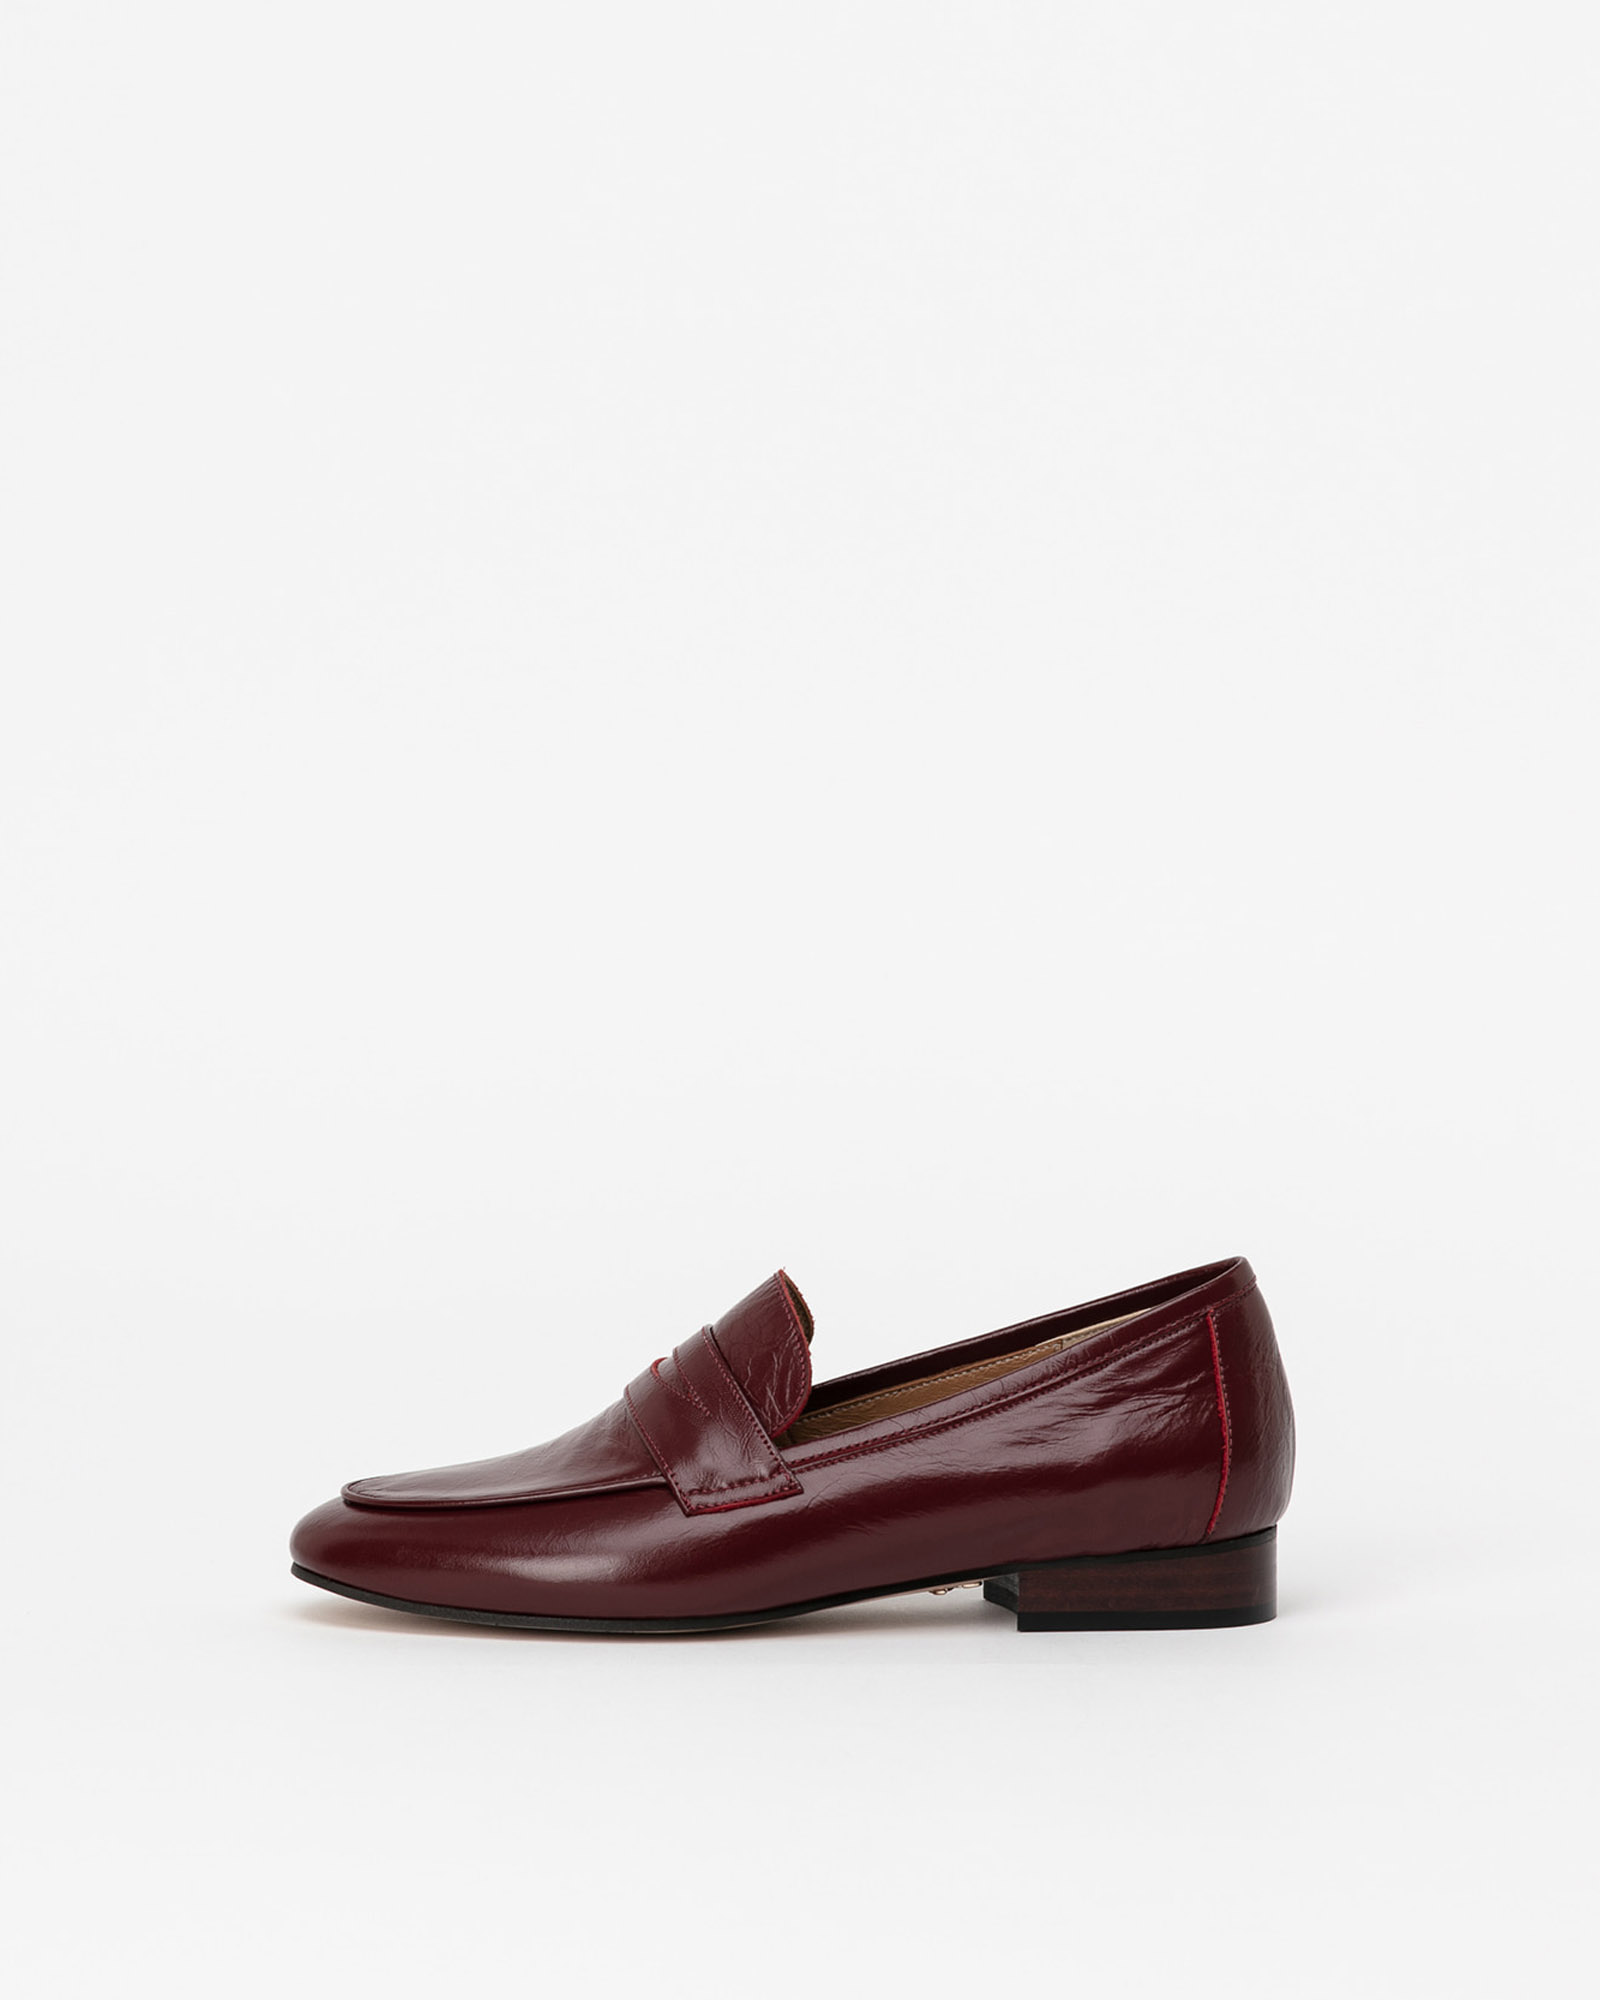 Sante Soft Loafers in Wrinkled Wine